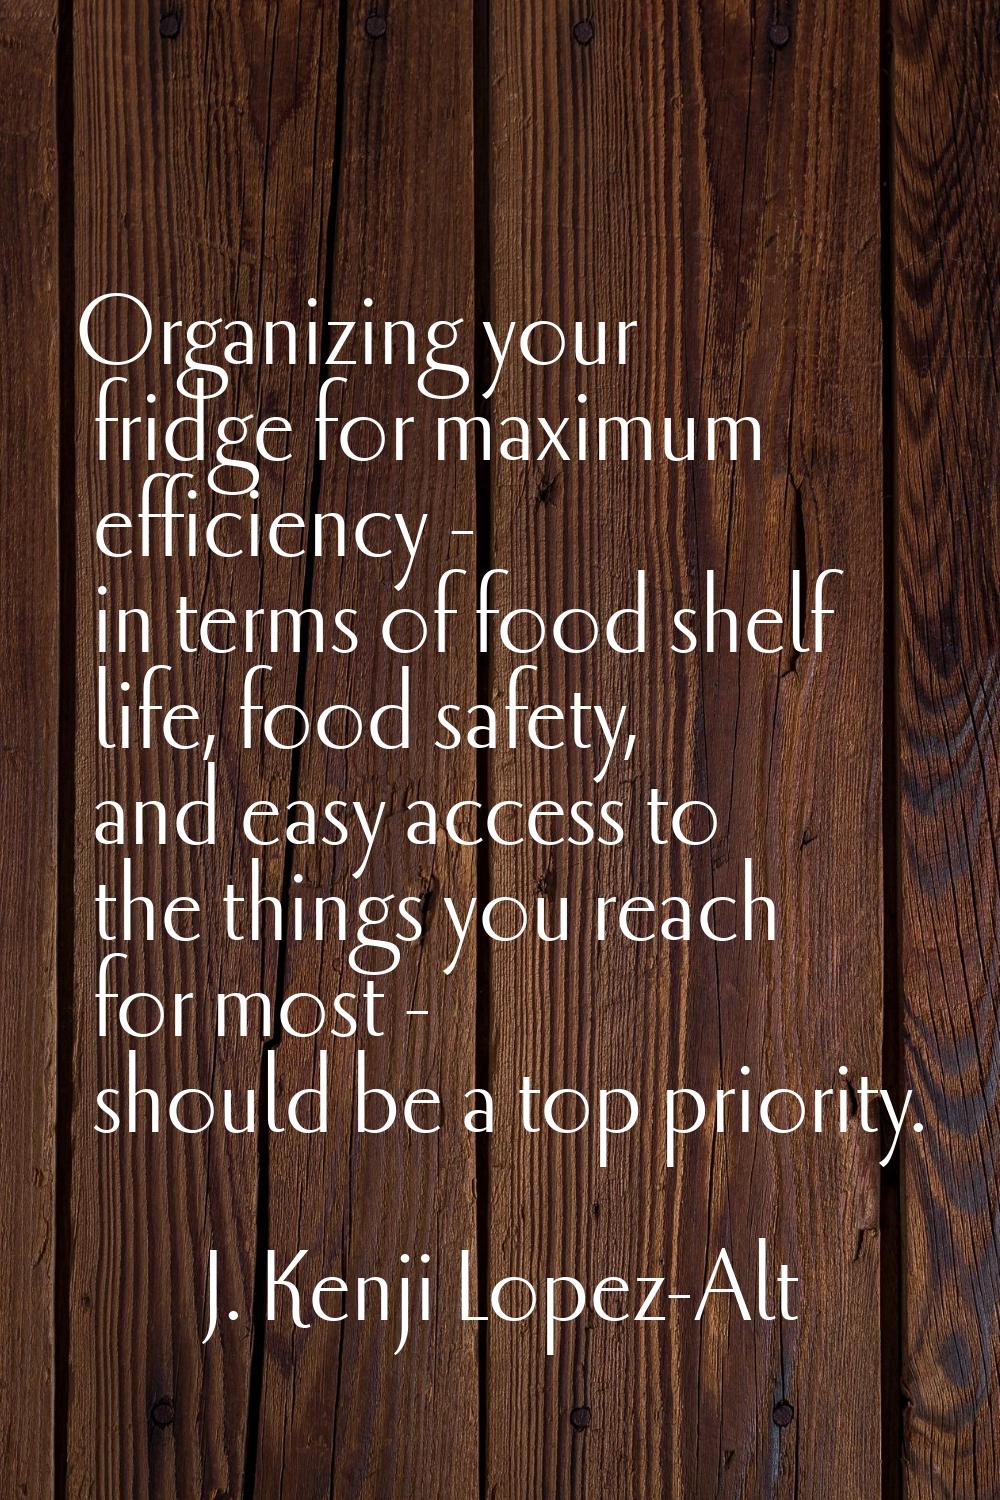 Organizing your fridge for maximum efficiency - in terms of food shelf life, food safety, and easy 